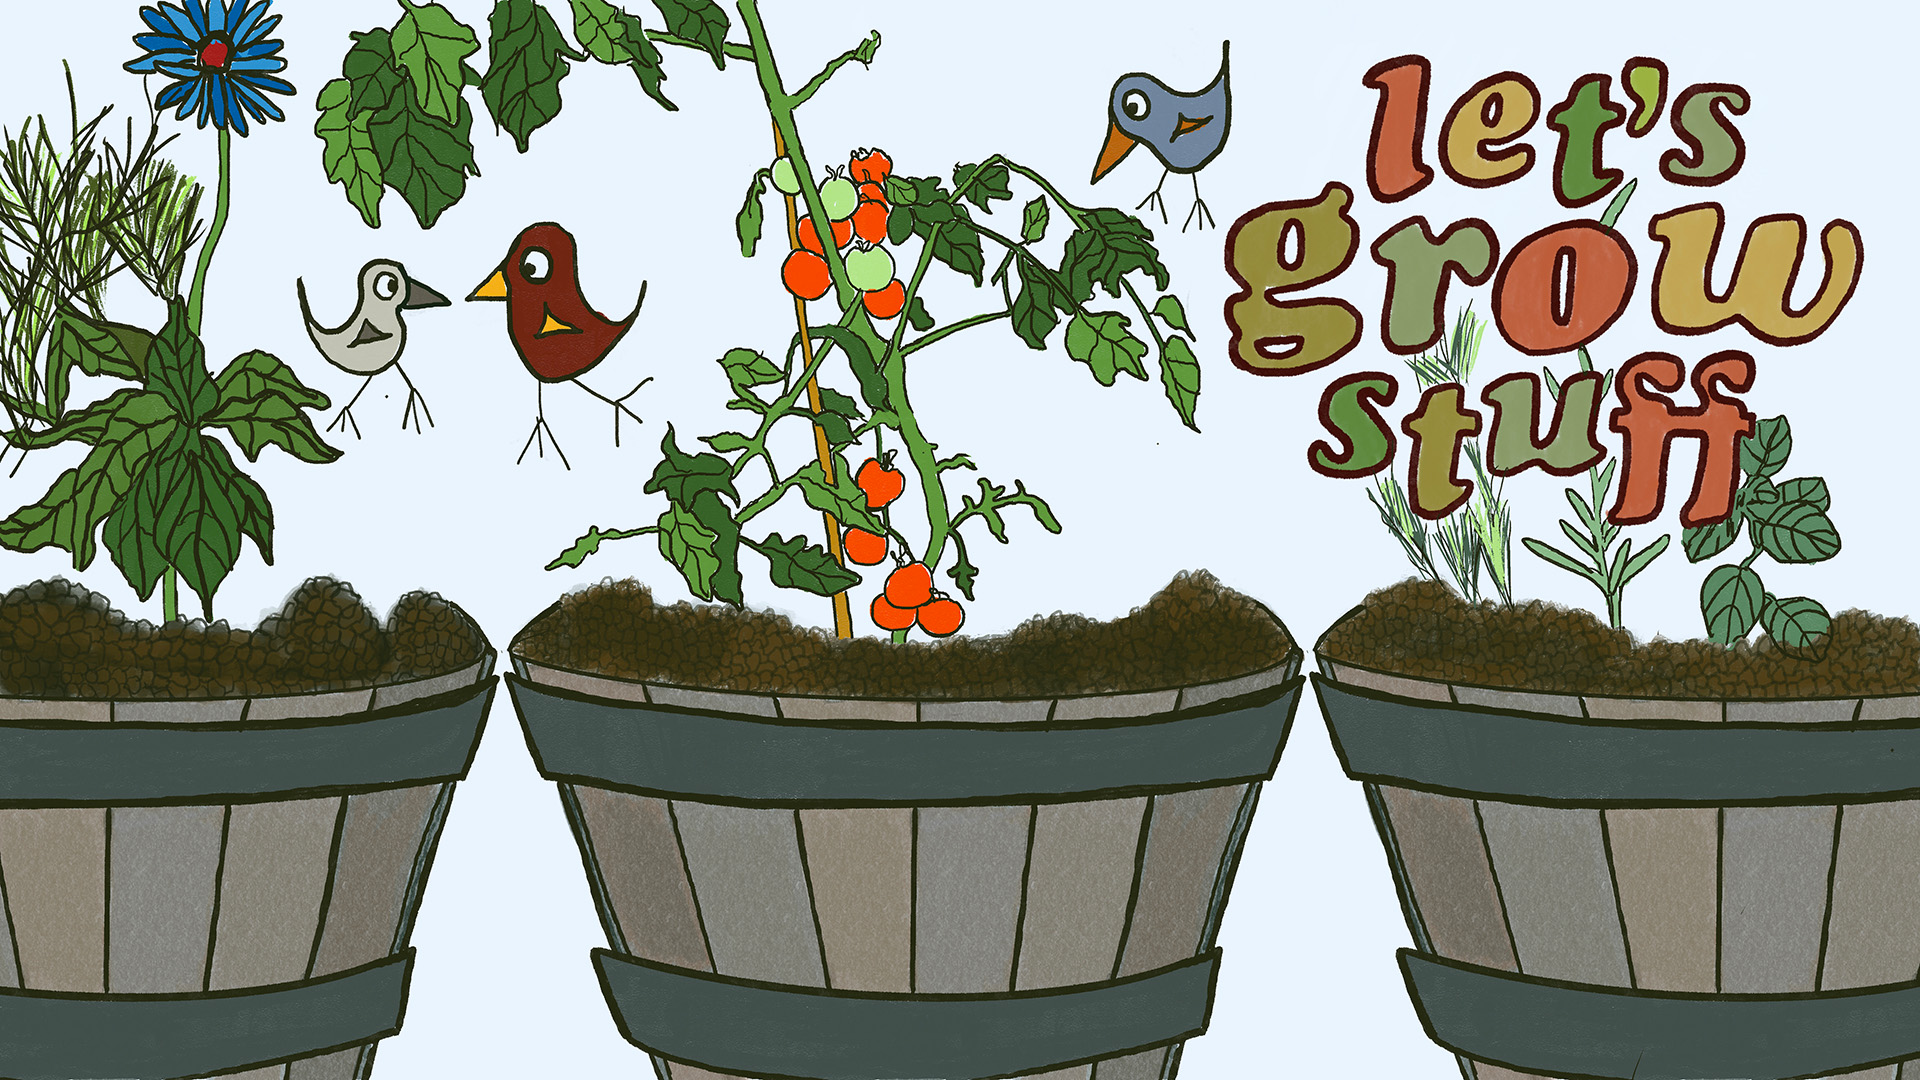 Three planters sit side-by side with coneflower, tomatoes and herb, surrounded by three birds